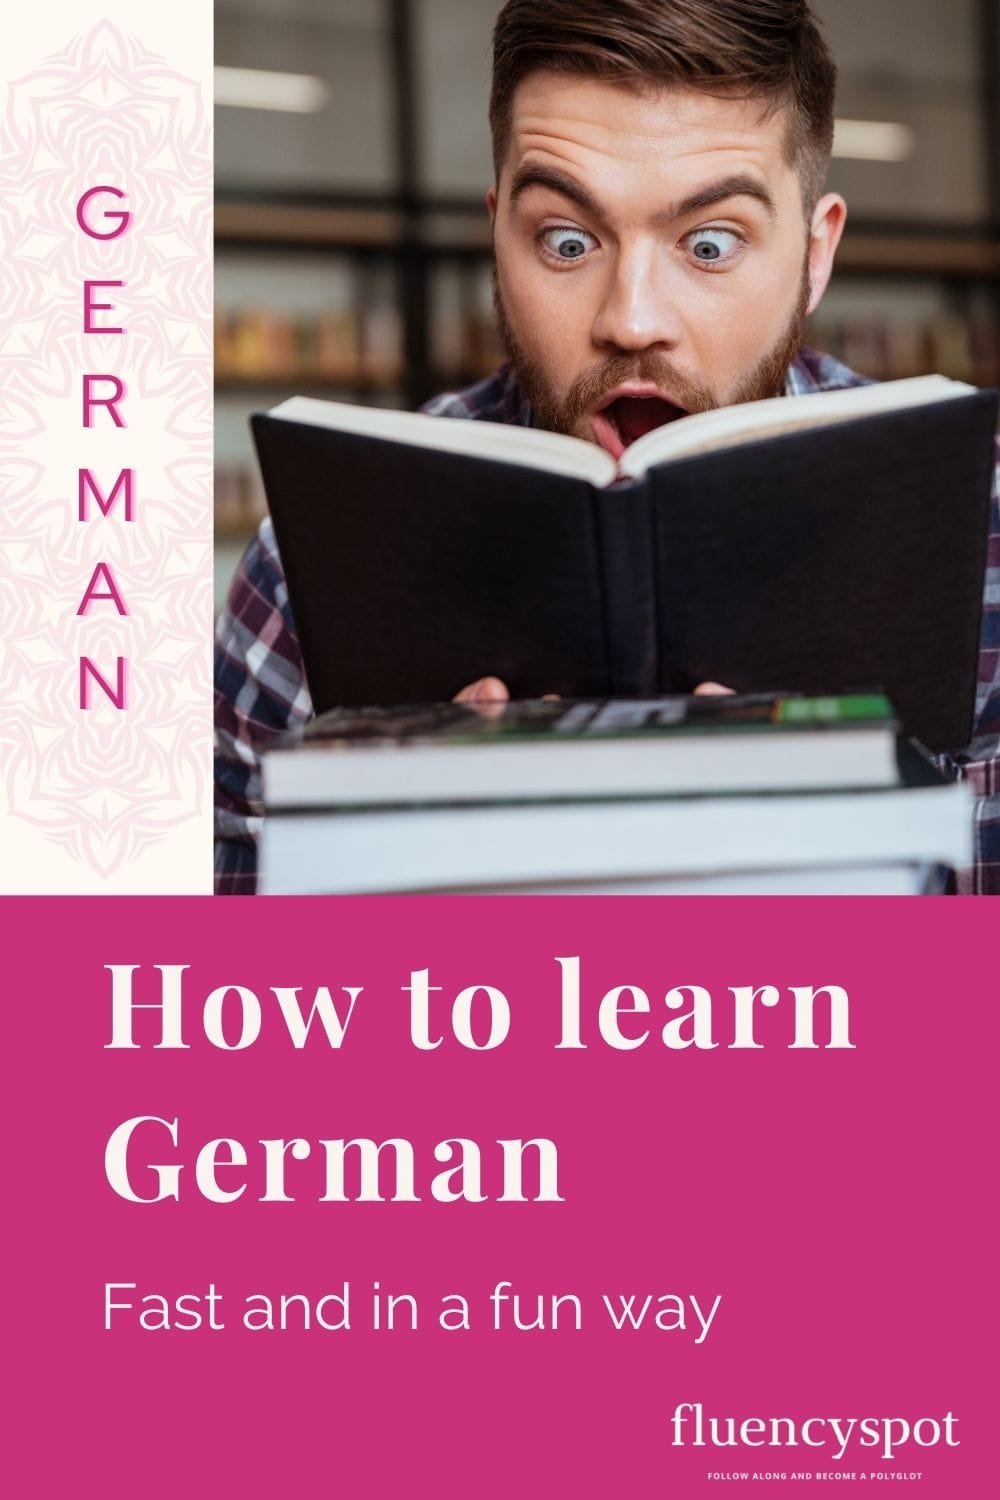 How to Learn German Fast and in a Fun Way